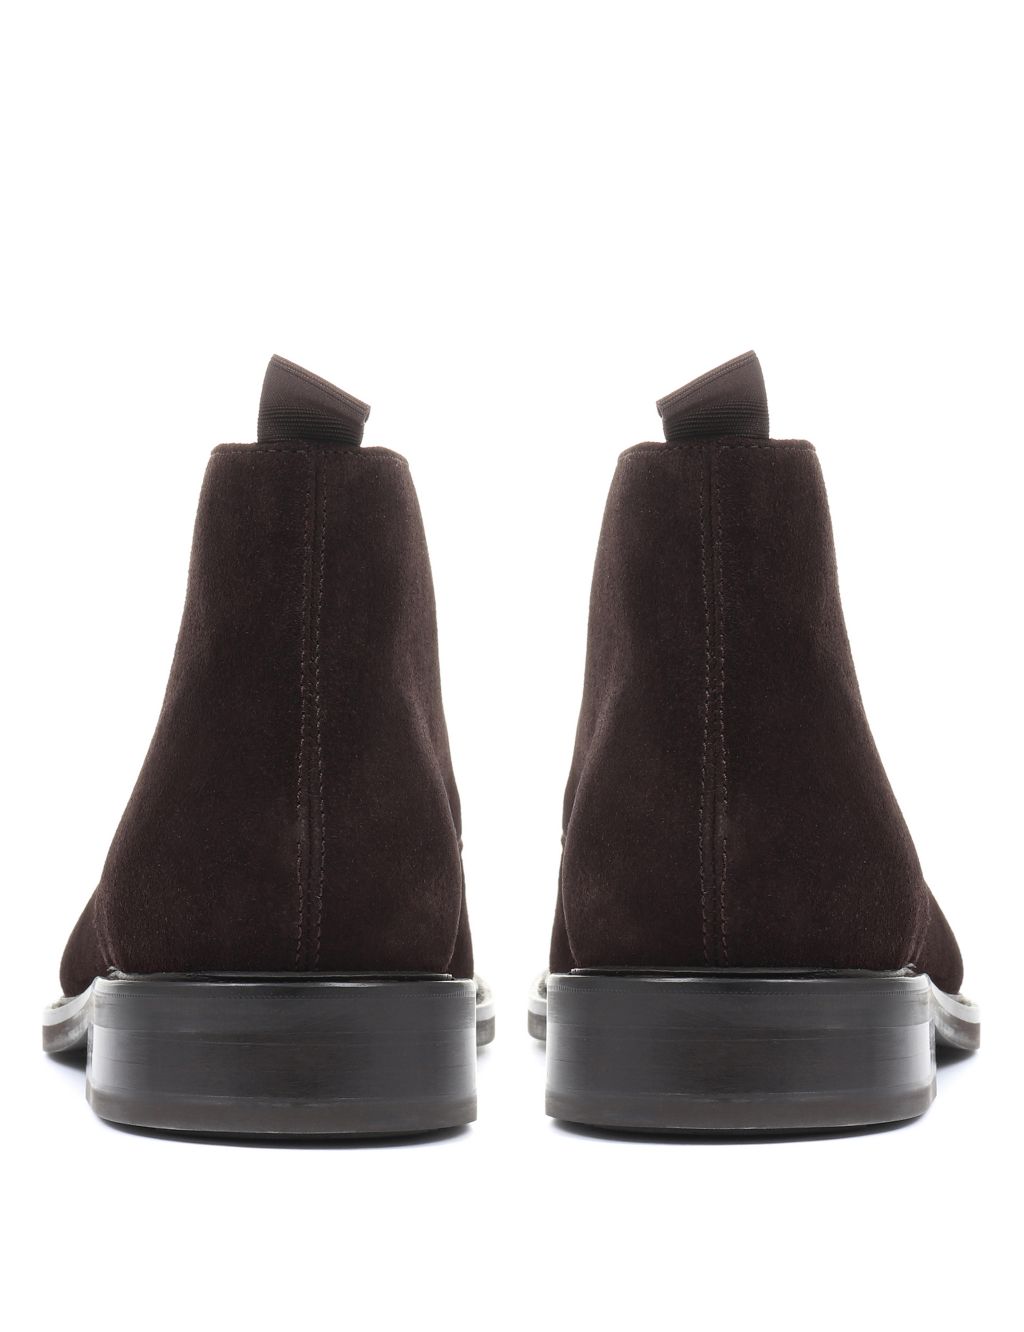 Suede Pull-on Chukka Boots image 4